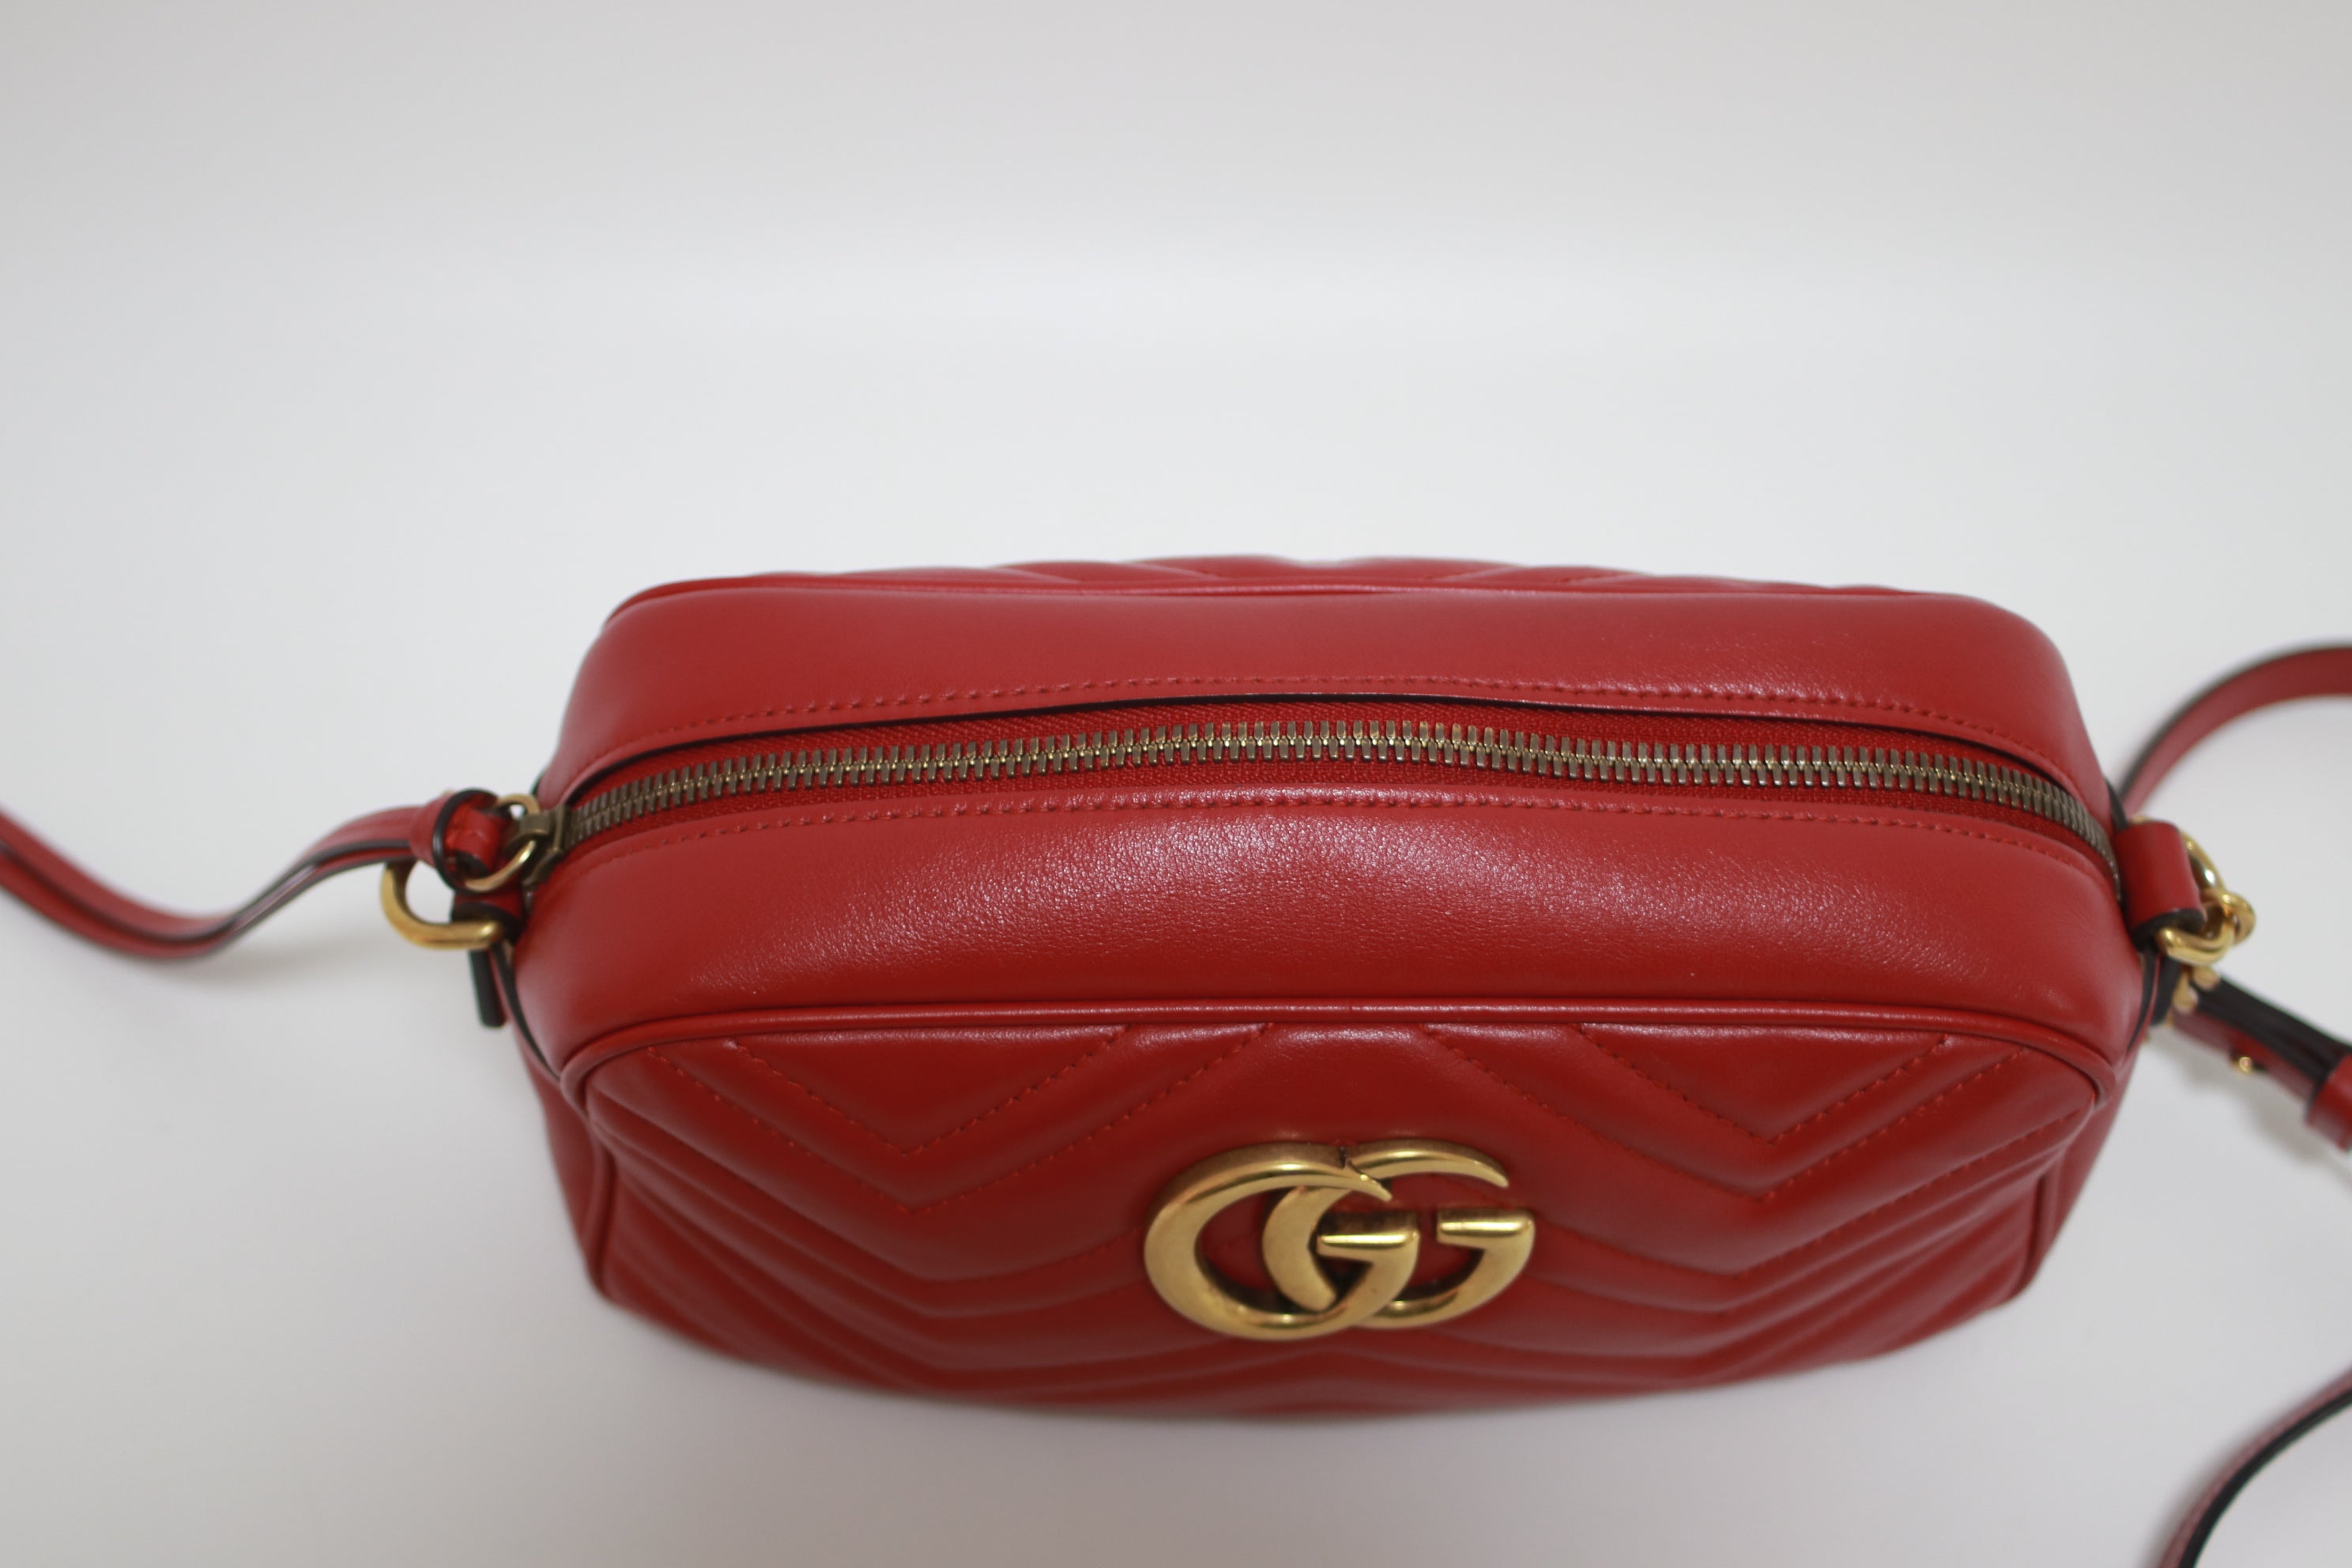 Gucci Marmont Small Shoulder Bag Red Used (7793)